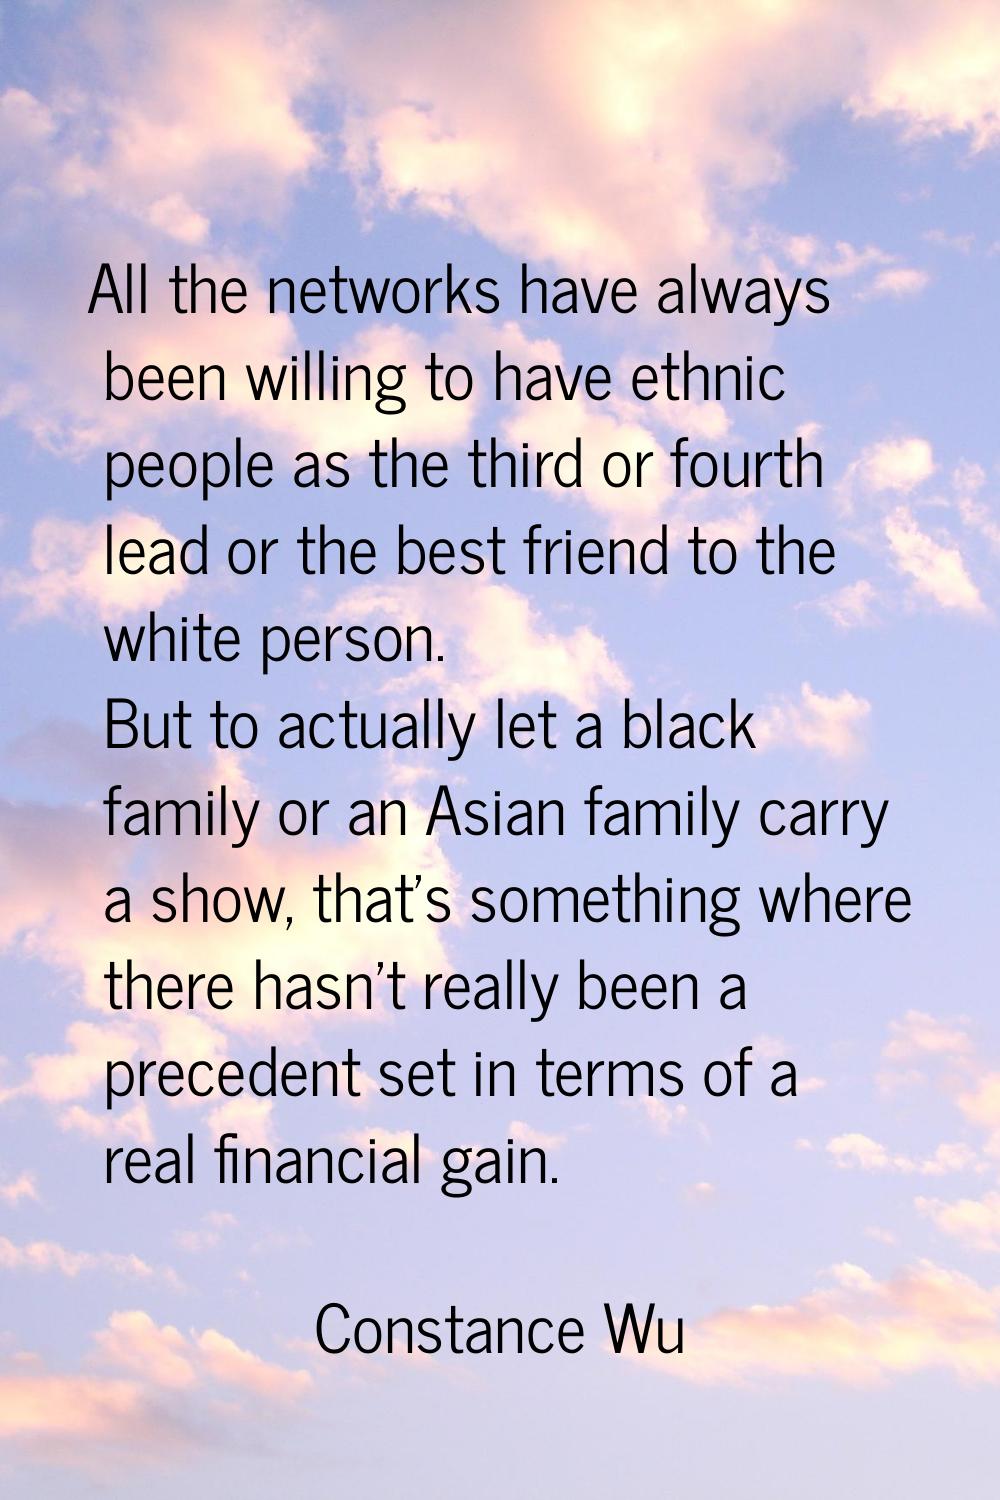 All the networks have always been willing to have ethnic people as the third or fourth lead or the 